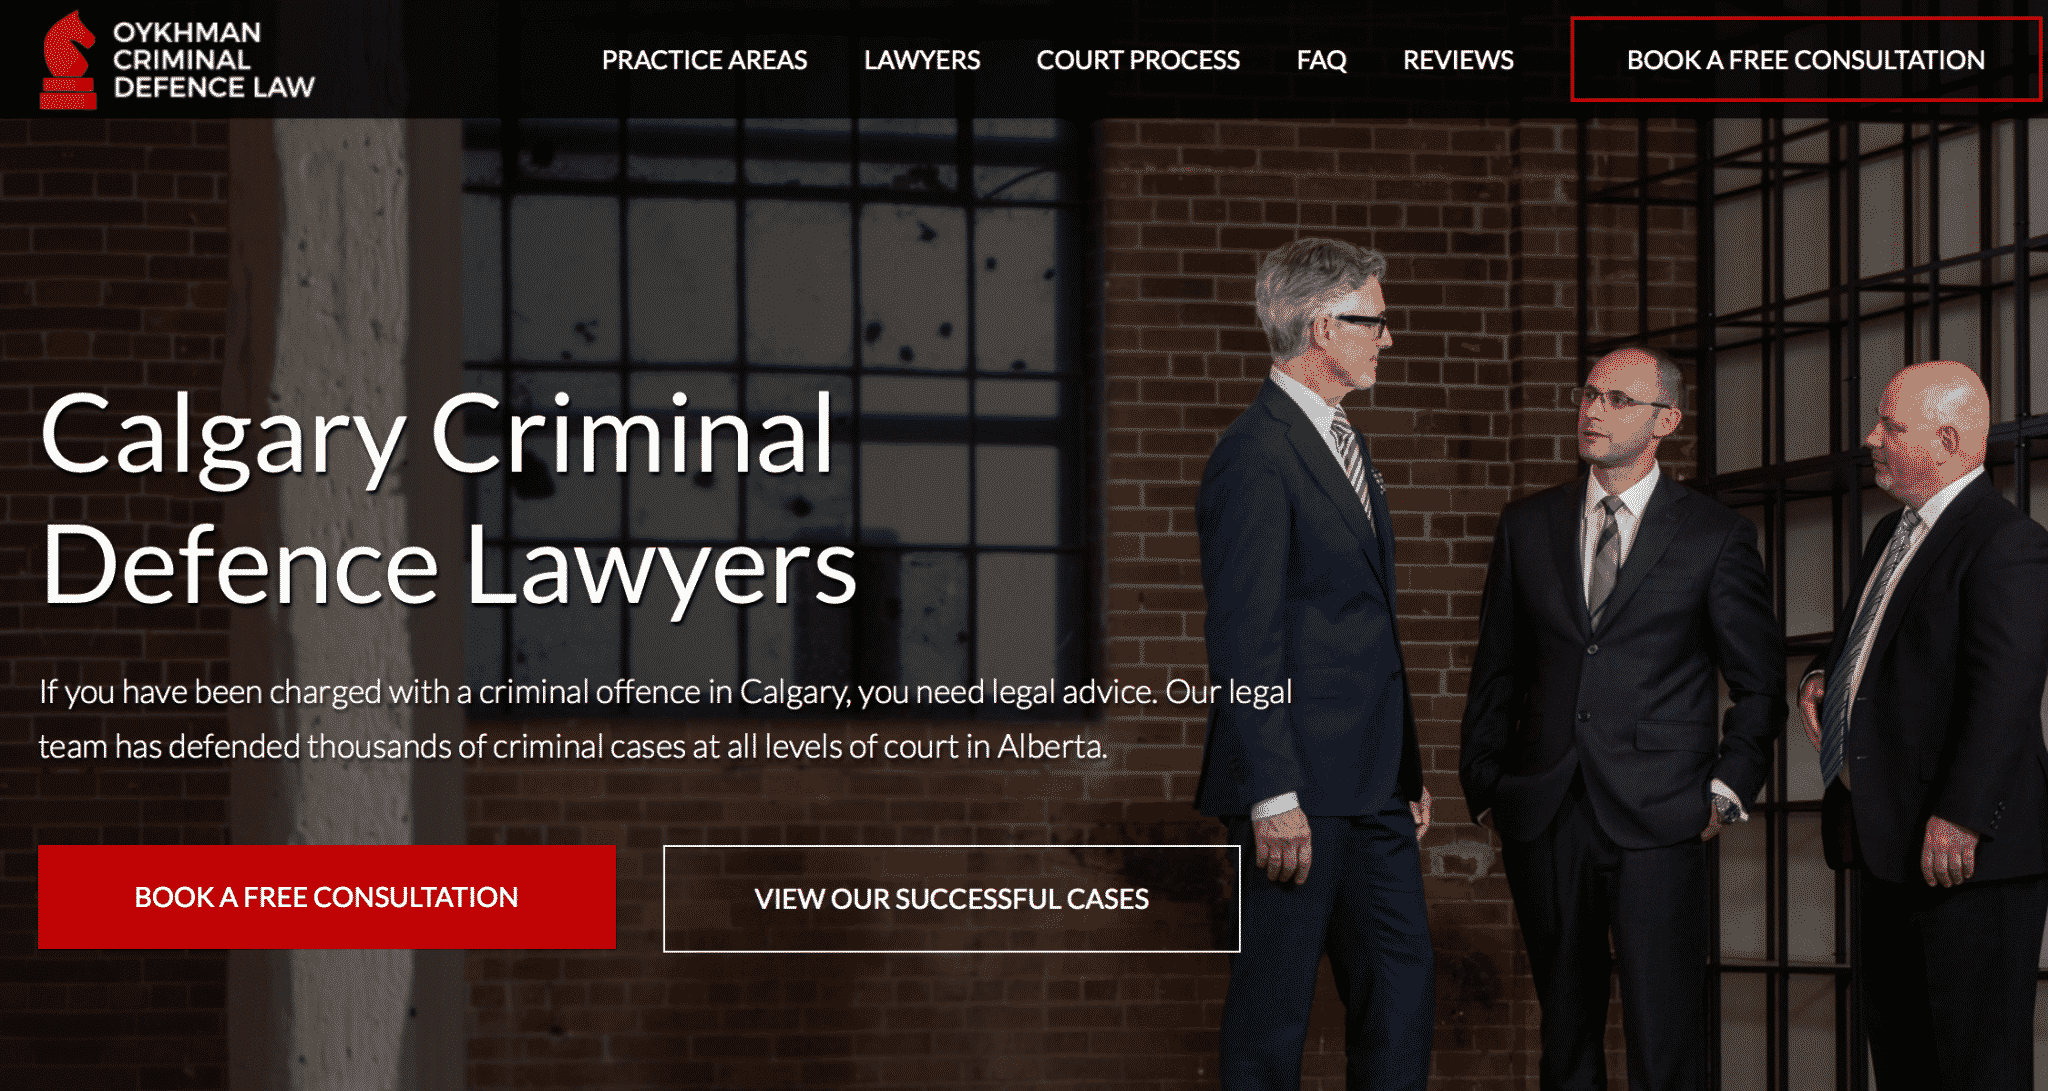 law firm websites 